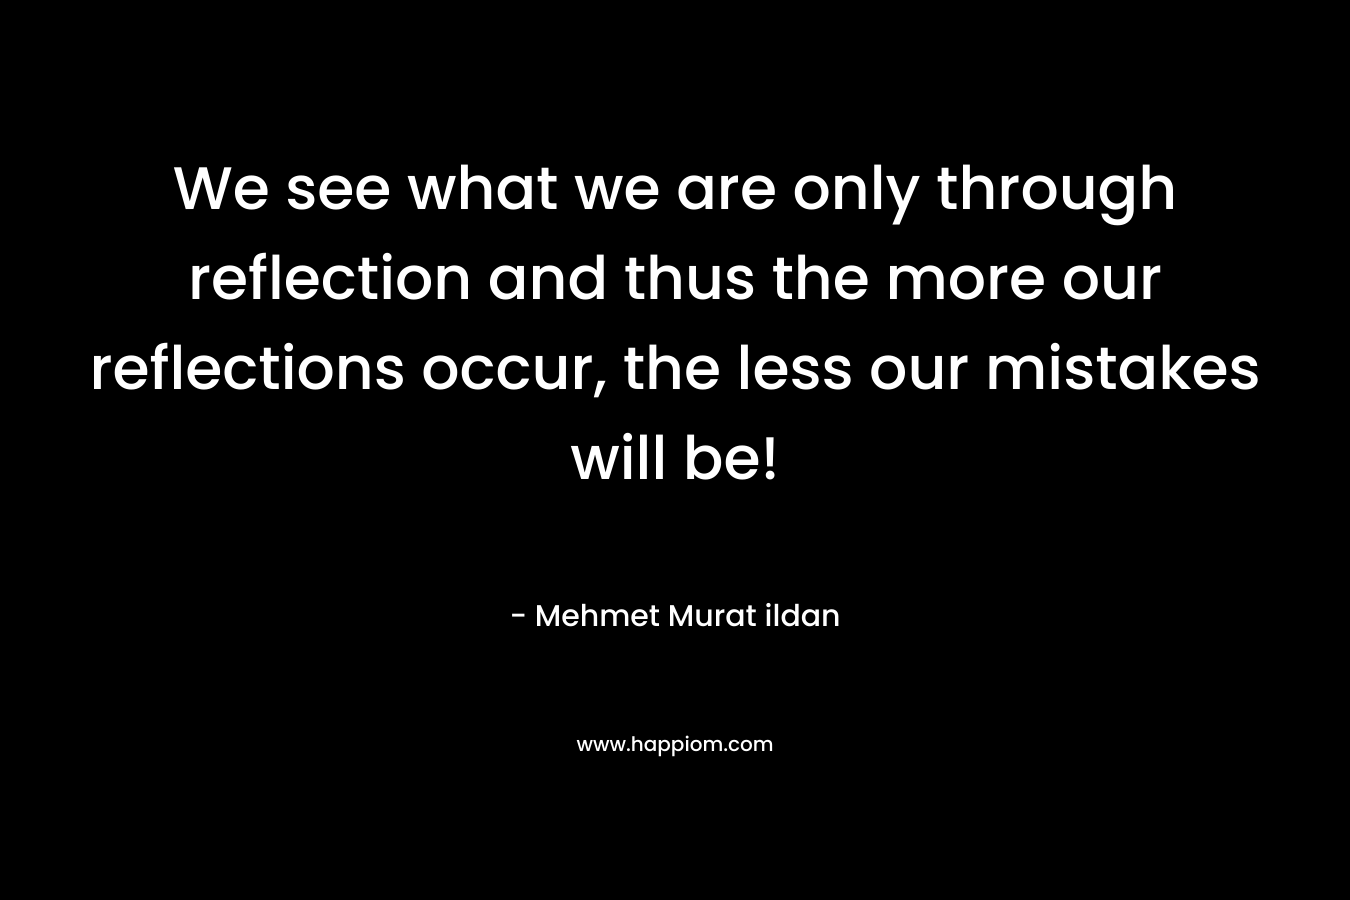 We see what we are only through reflection and thus the more our reflections occur, the less our mistakes will be! – Mehmet Murat ildan